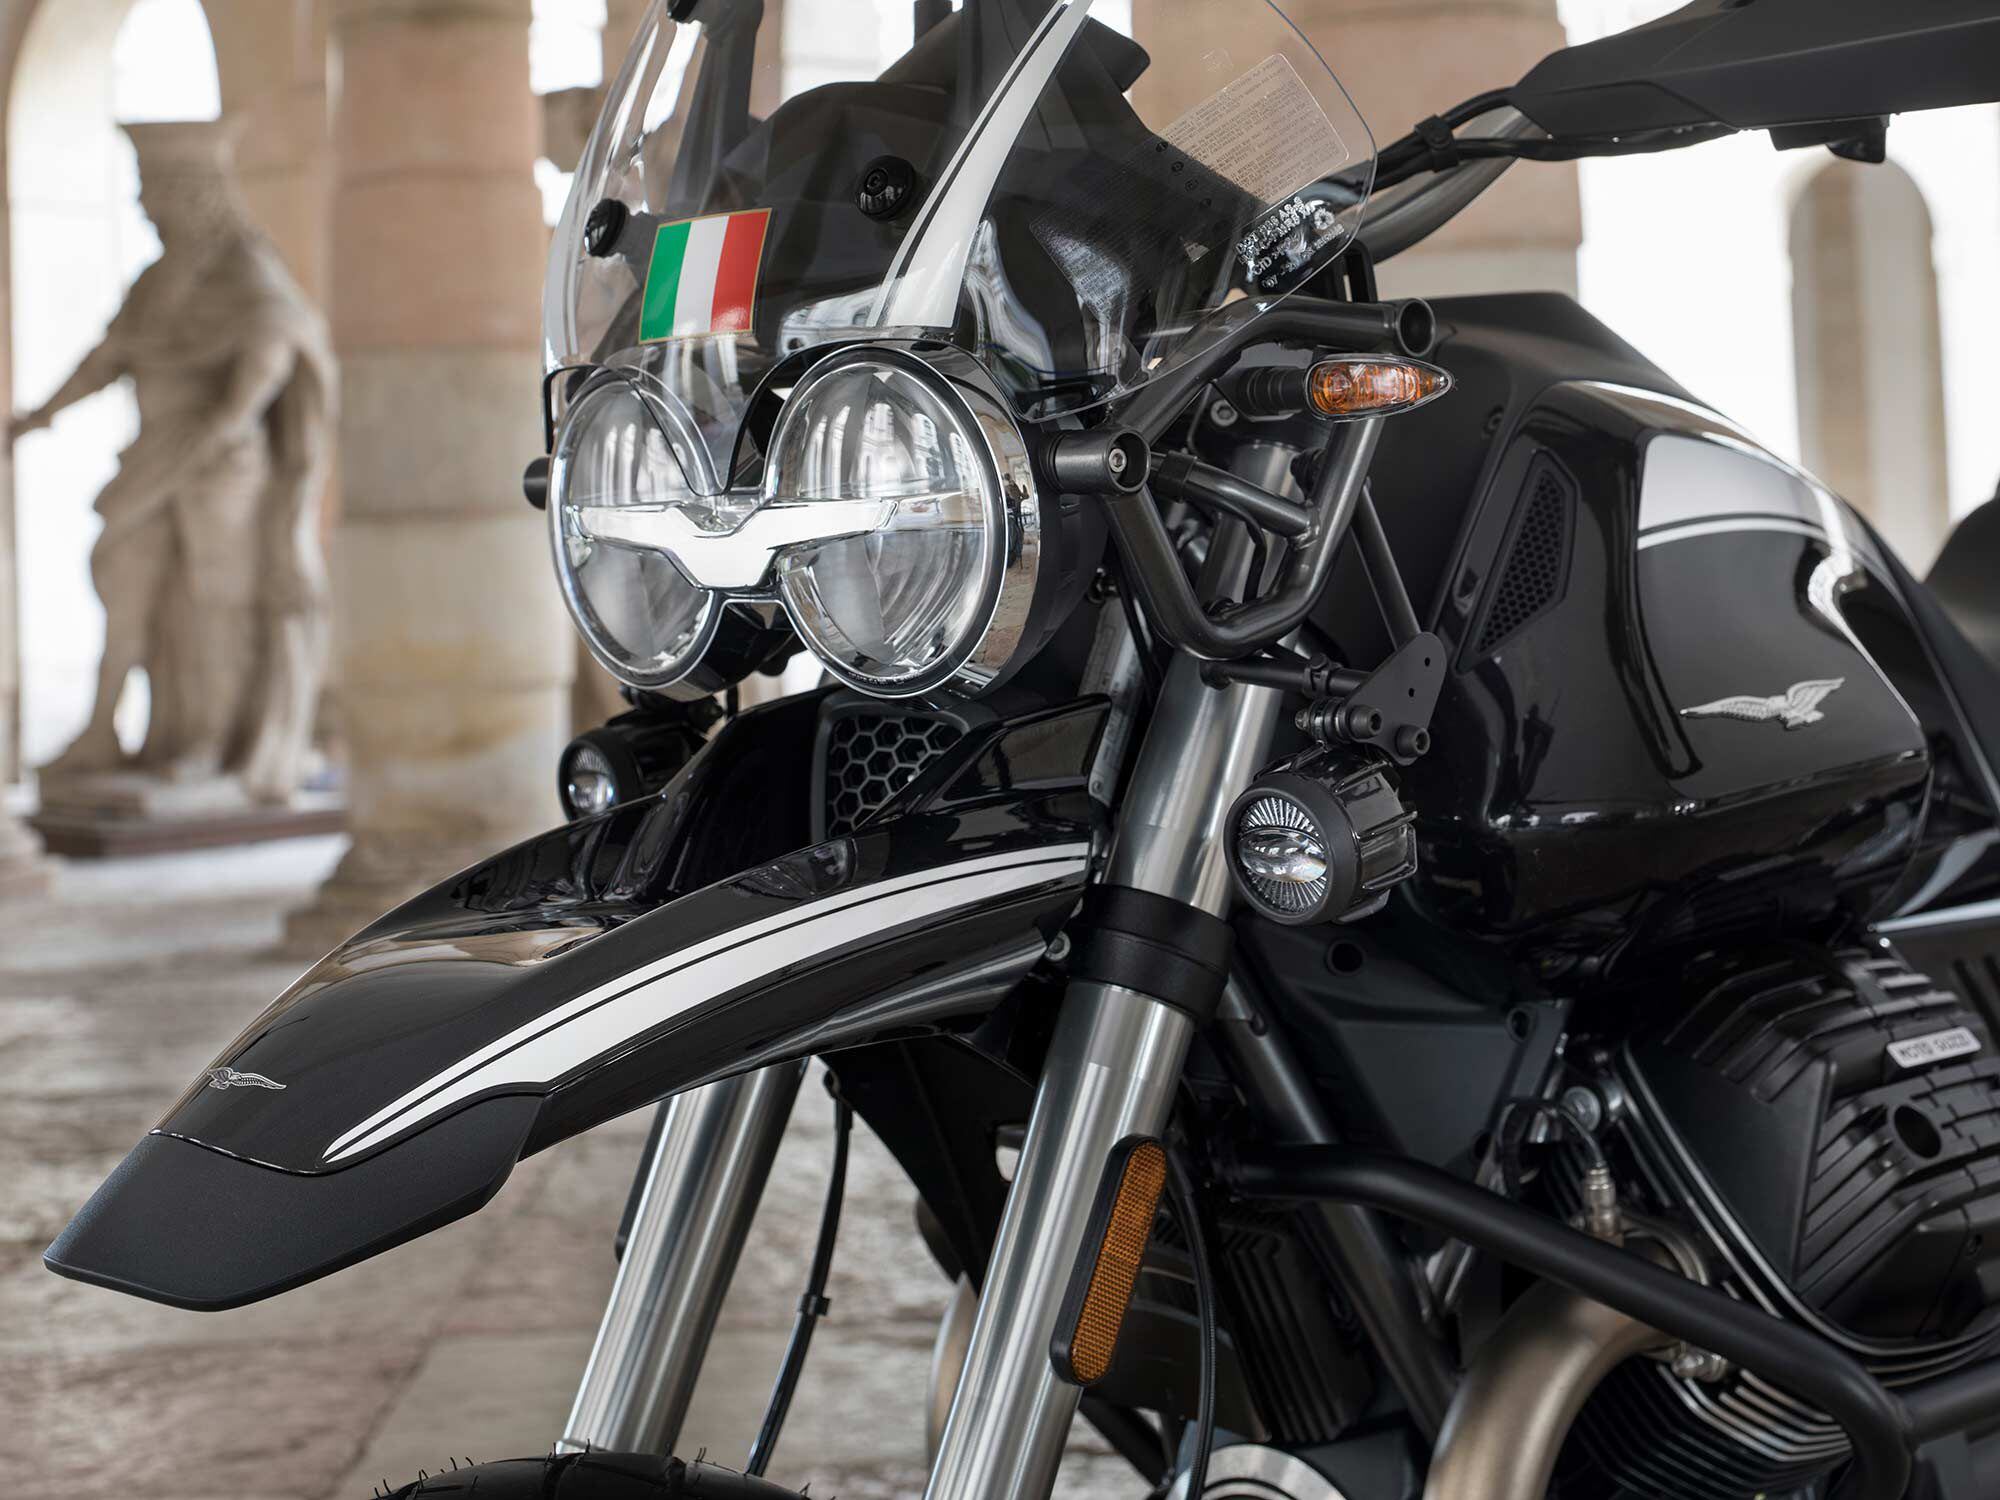 The larger touring windscreen comes standard with the Guardia D’Onore edition.